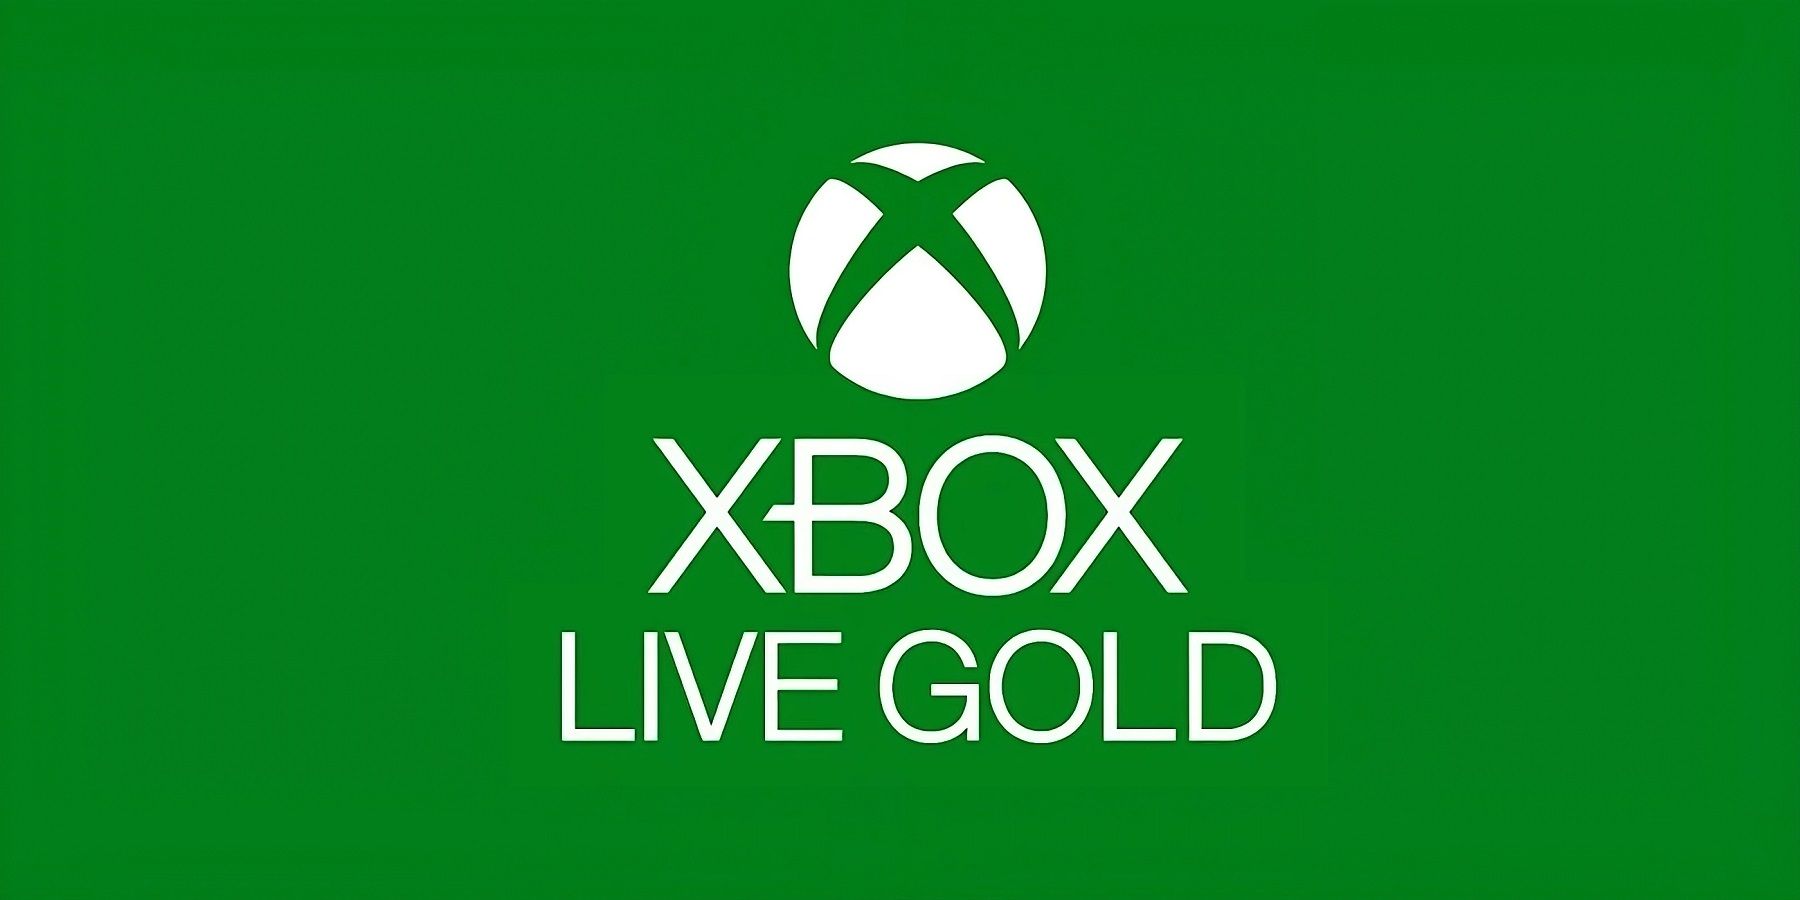 Microsoft adds new profile badge in memory of Xbox Live Gold